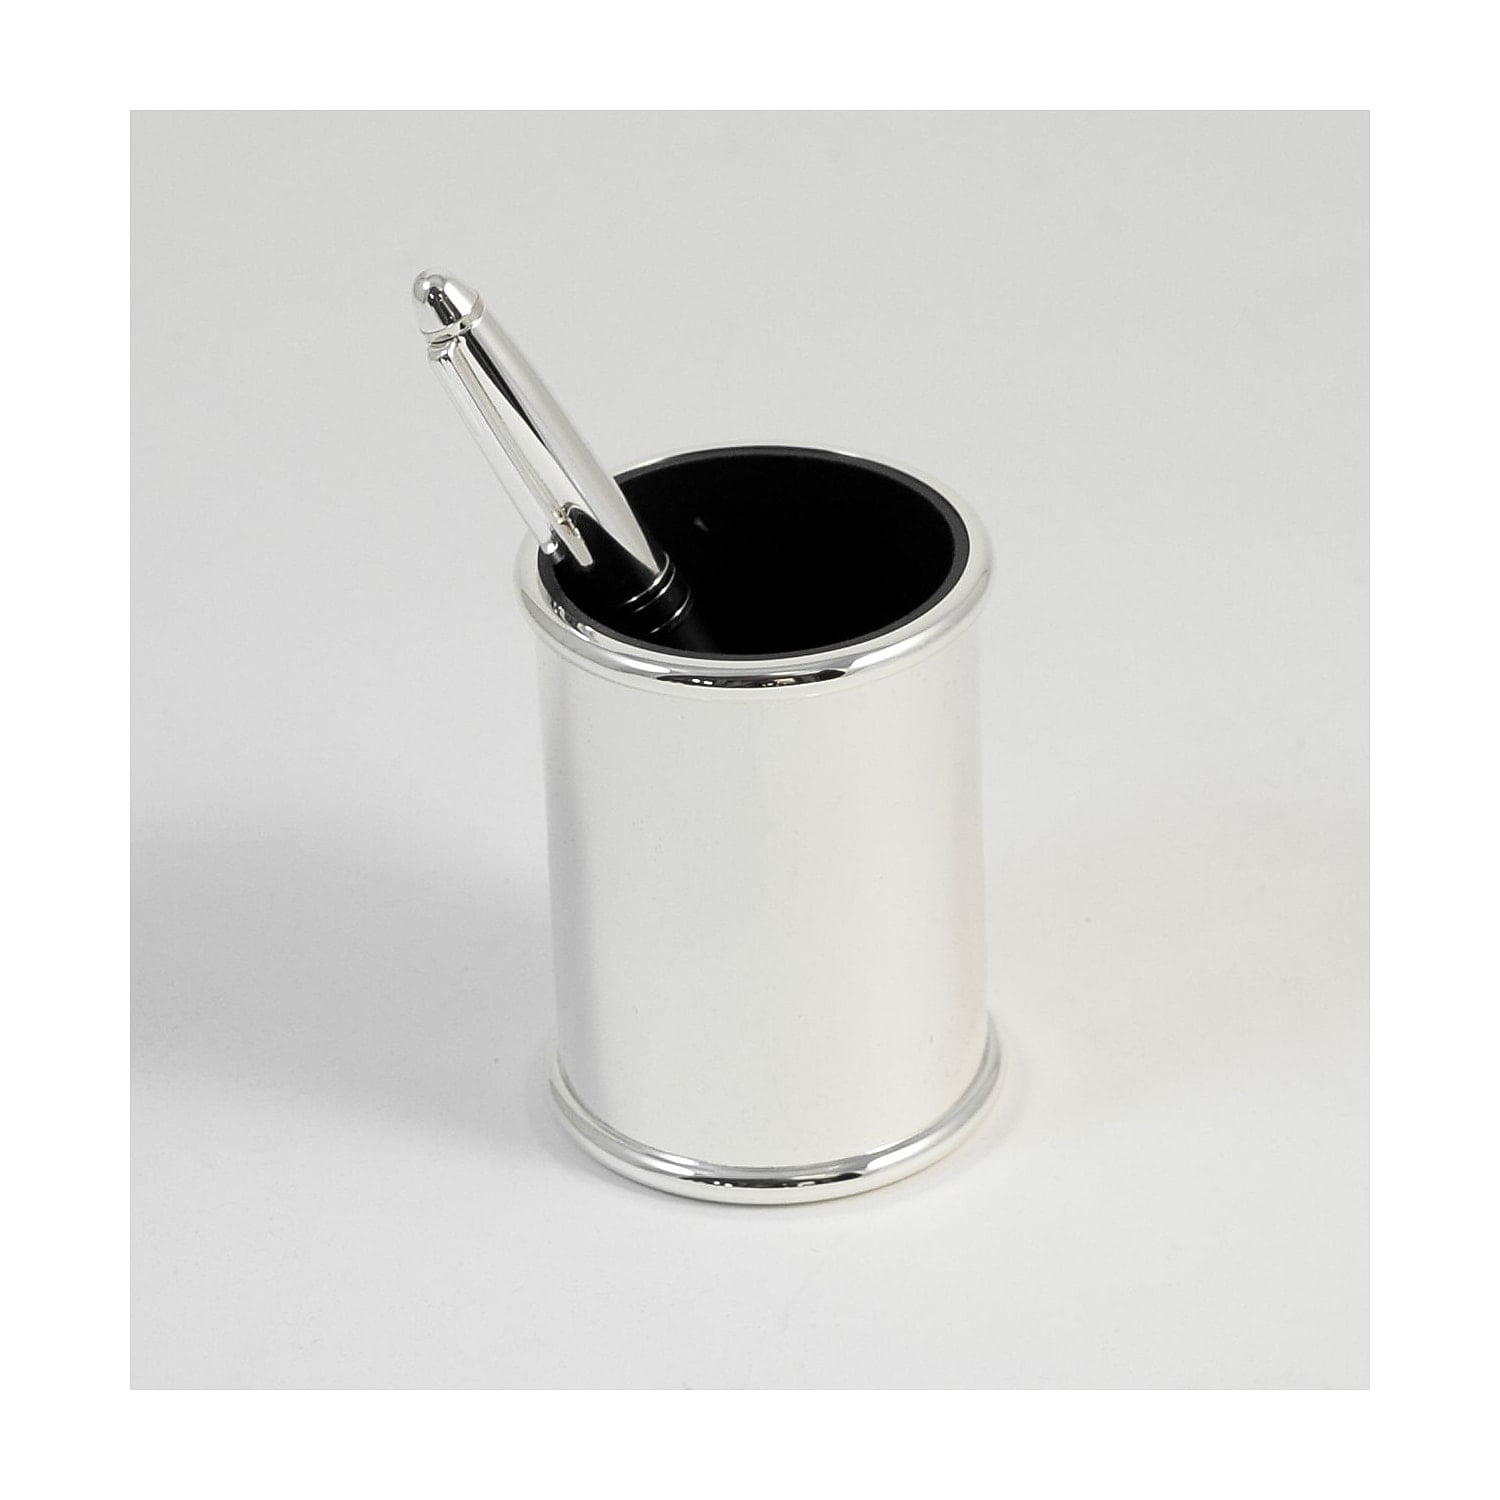 Picture of Bey-Berk International D595 Silver Plated Pen Cup with Black Abs Plastic Lining - Black